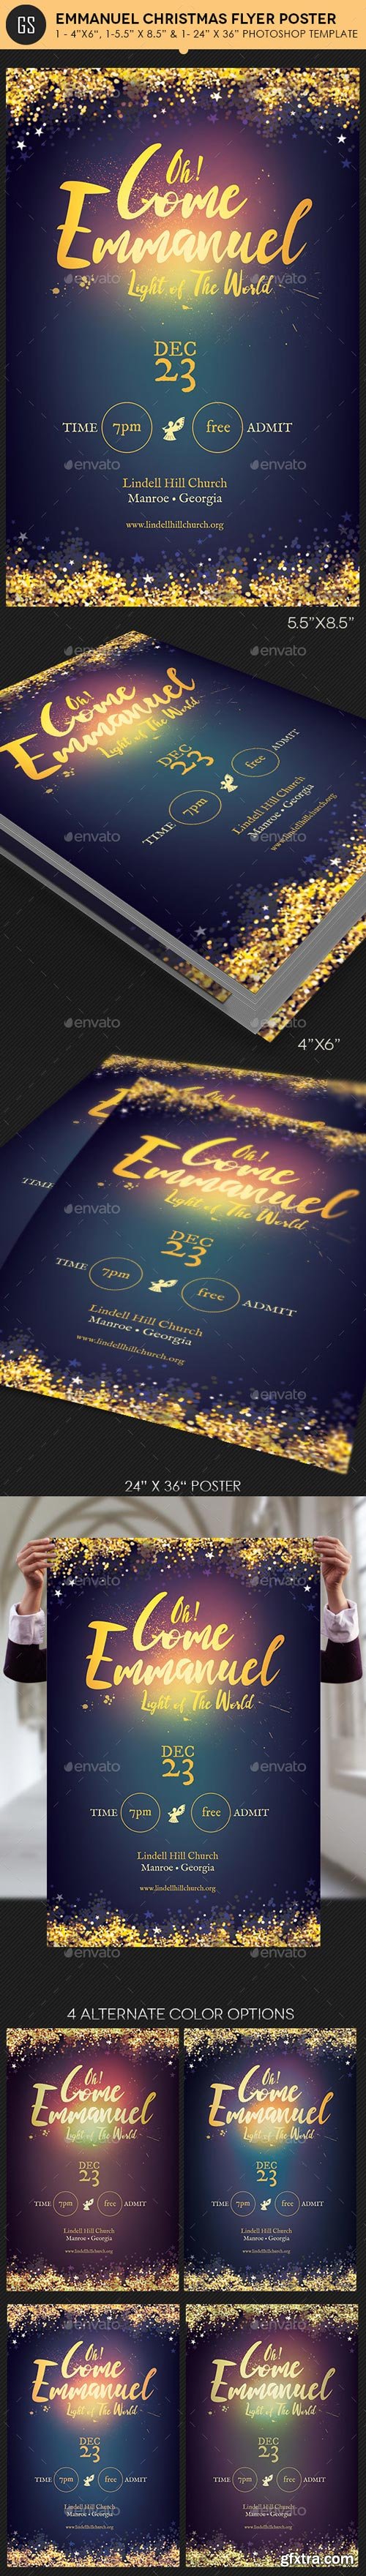 GraphicRiver - Emmanuel Christmas Cantata Flyer Poster Template - 18669995